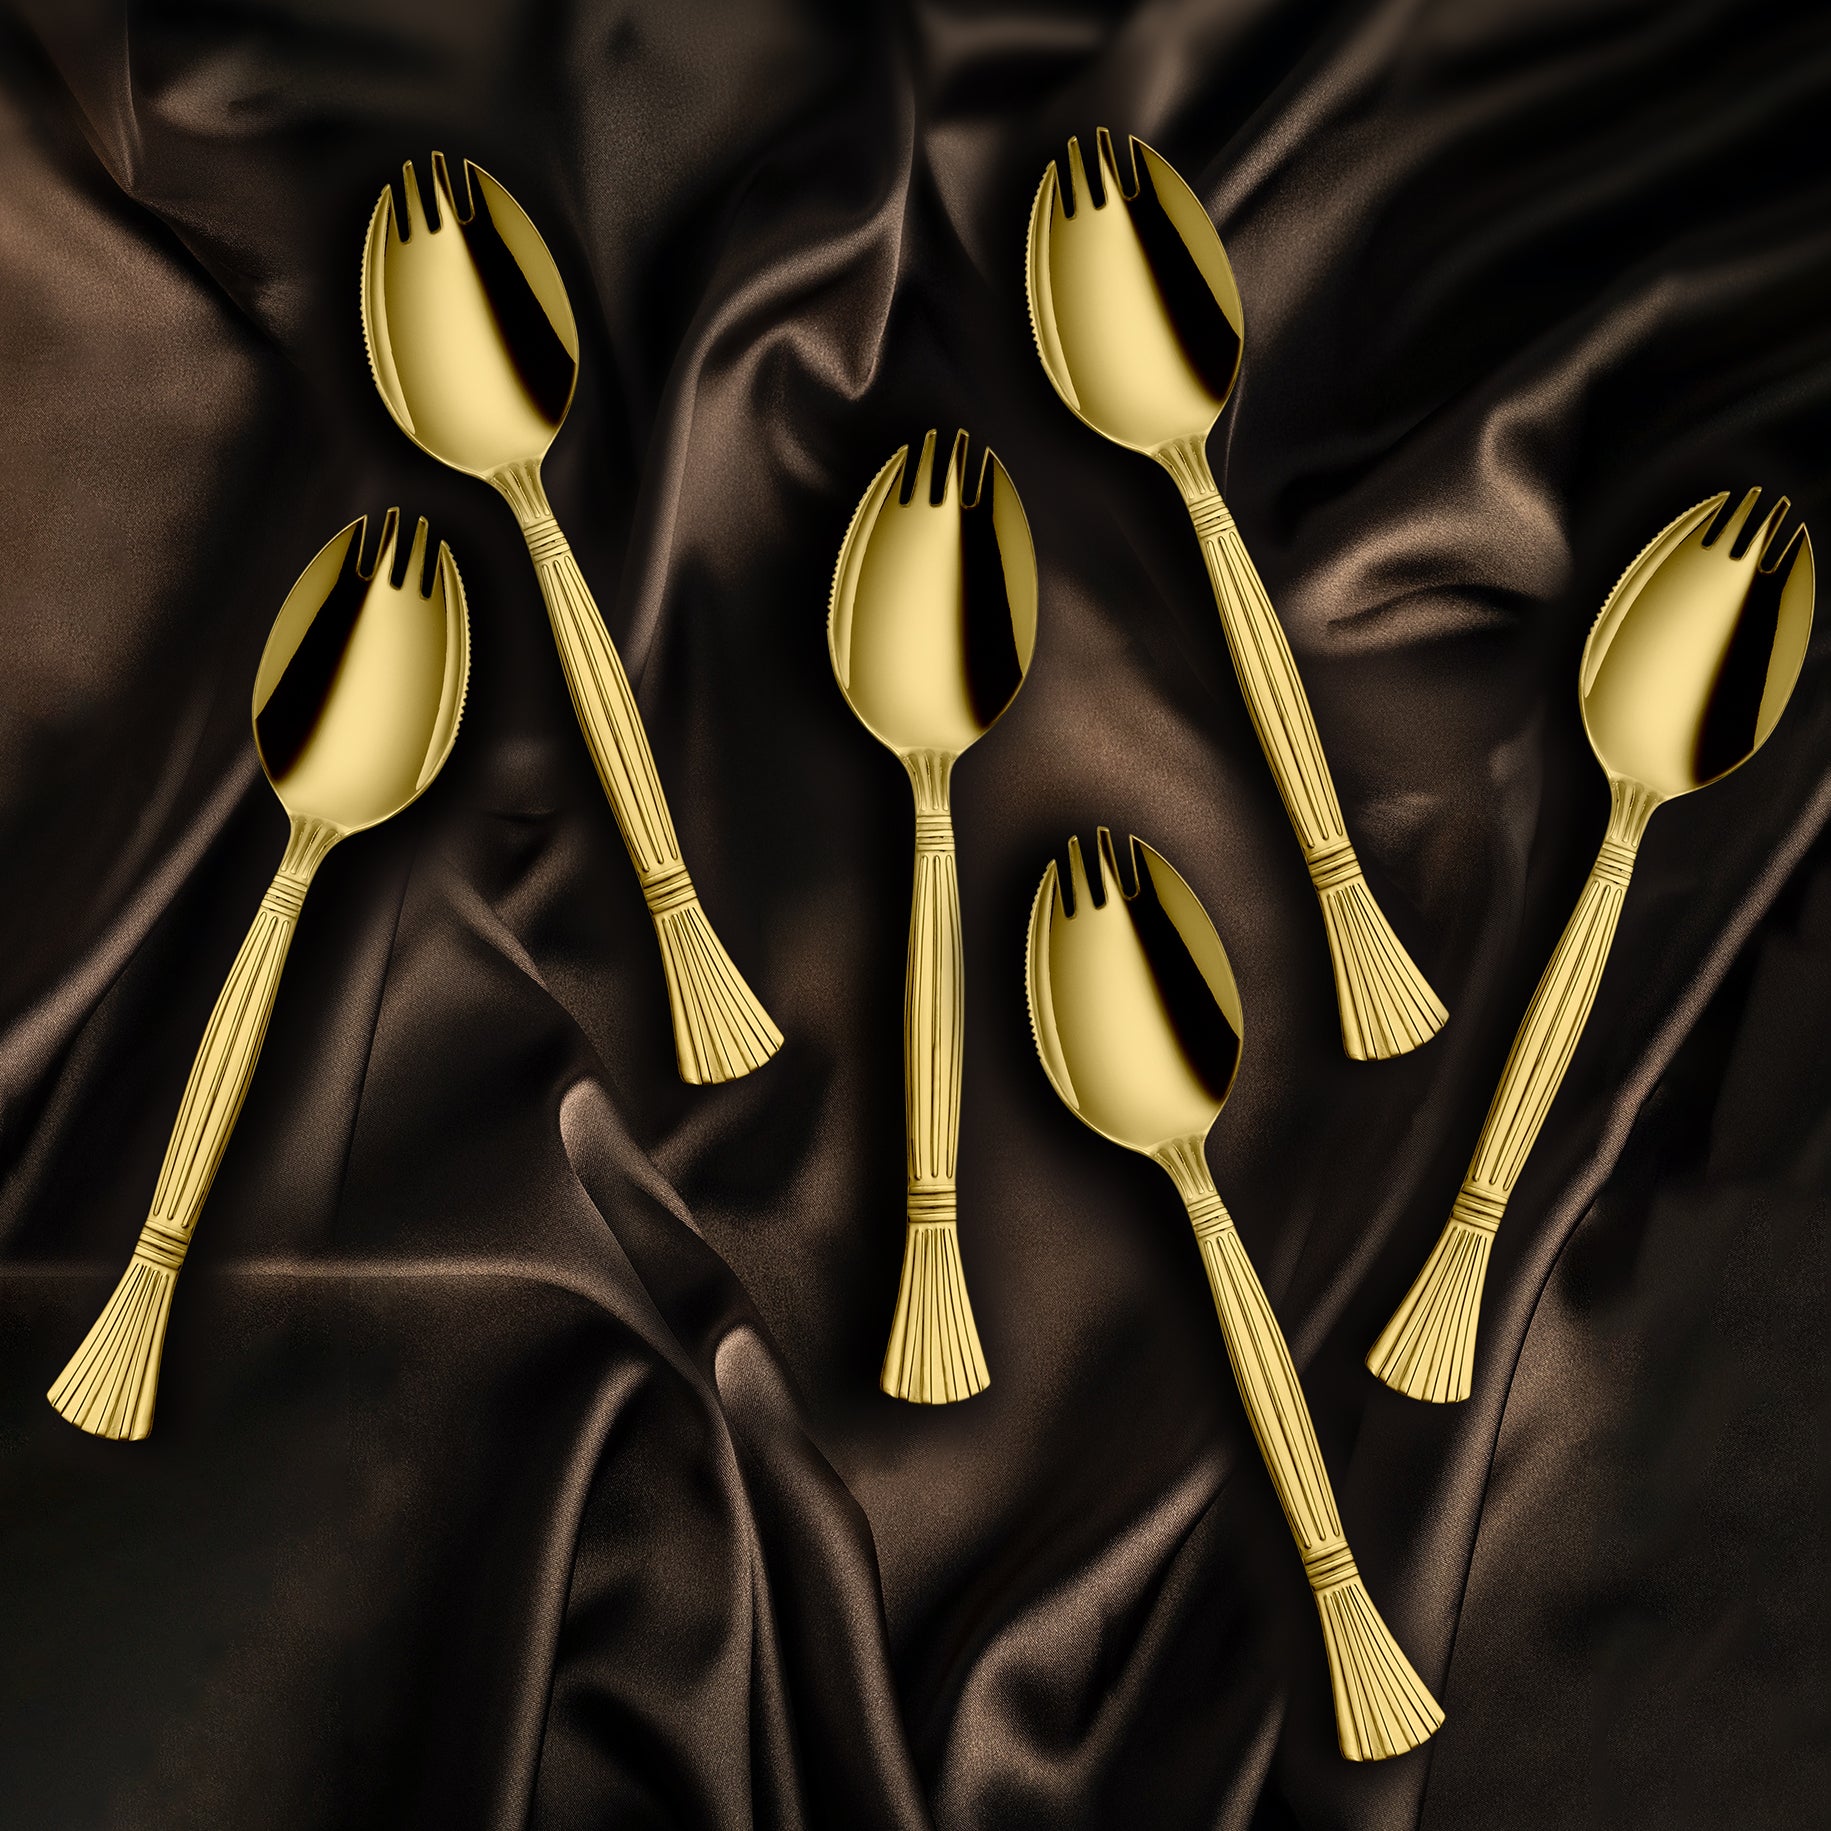 Stainless Steel 6 PCS Cutlery with Gold PVD Coating Spork 2 IN 1